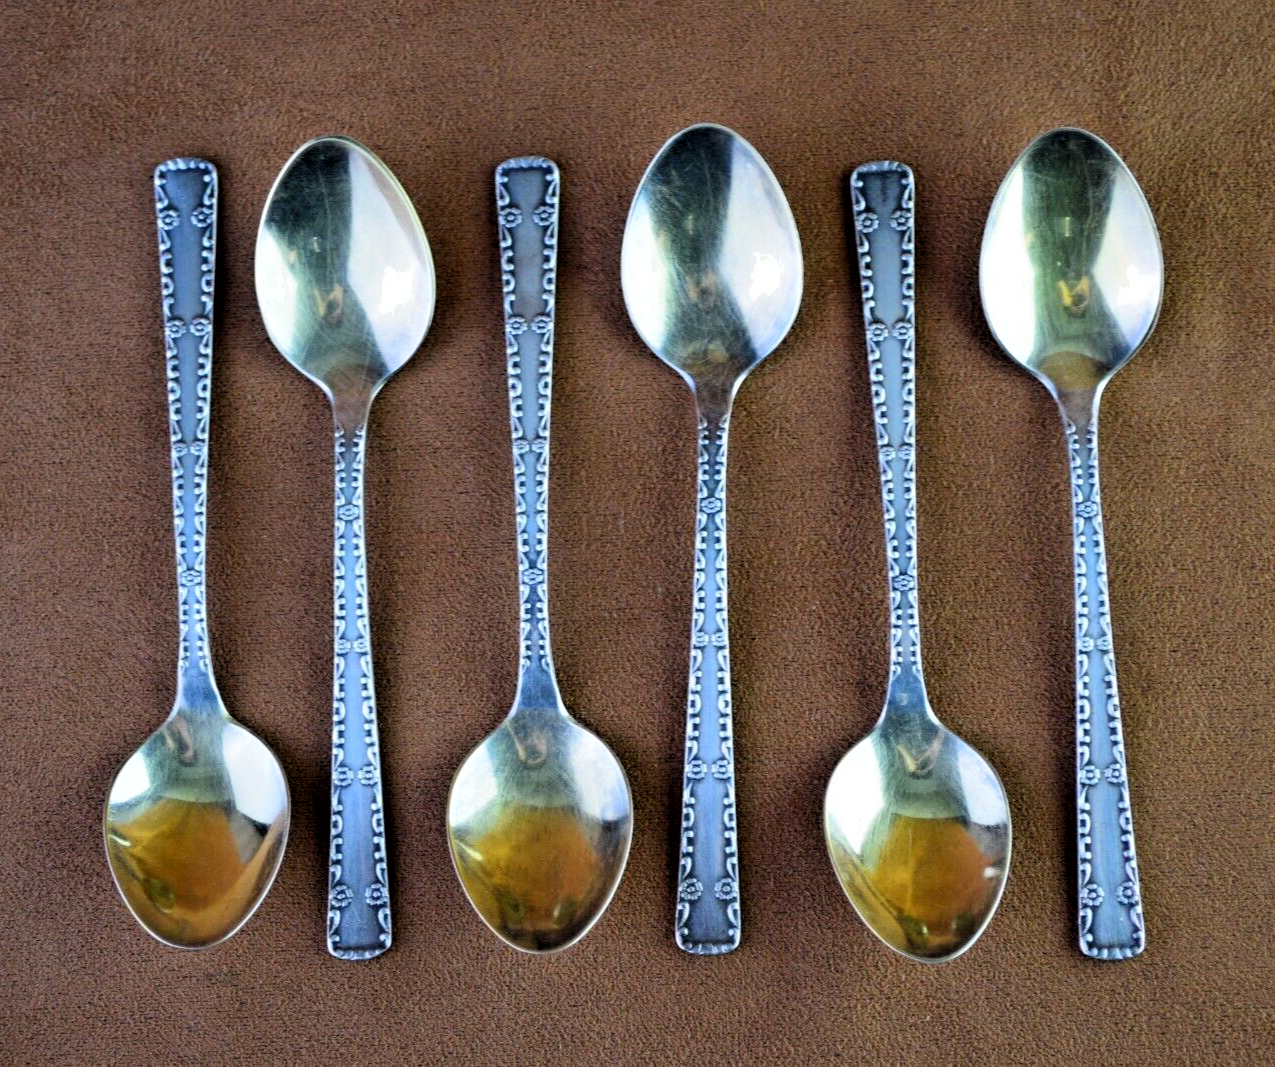 Vintage Coffee Spoons Silver Plated Melсhior Set of 6 Soviet Coffe Spoons